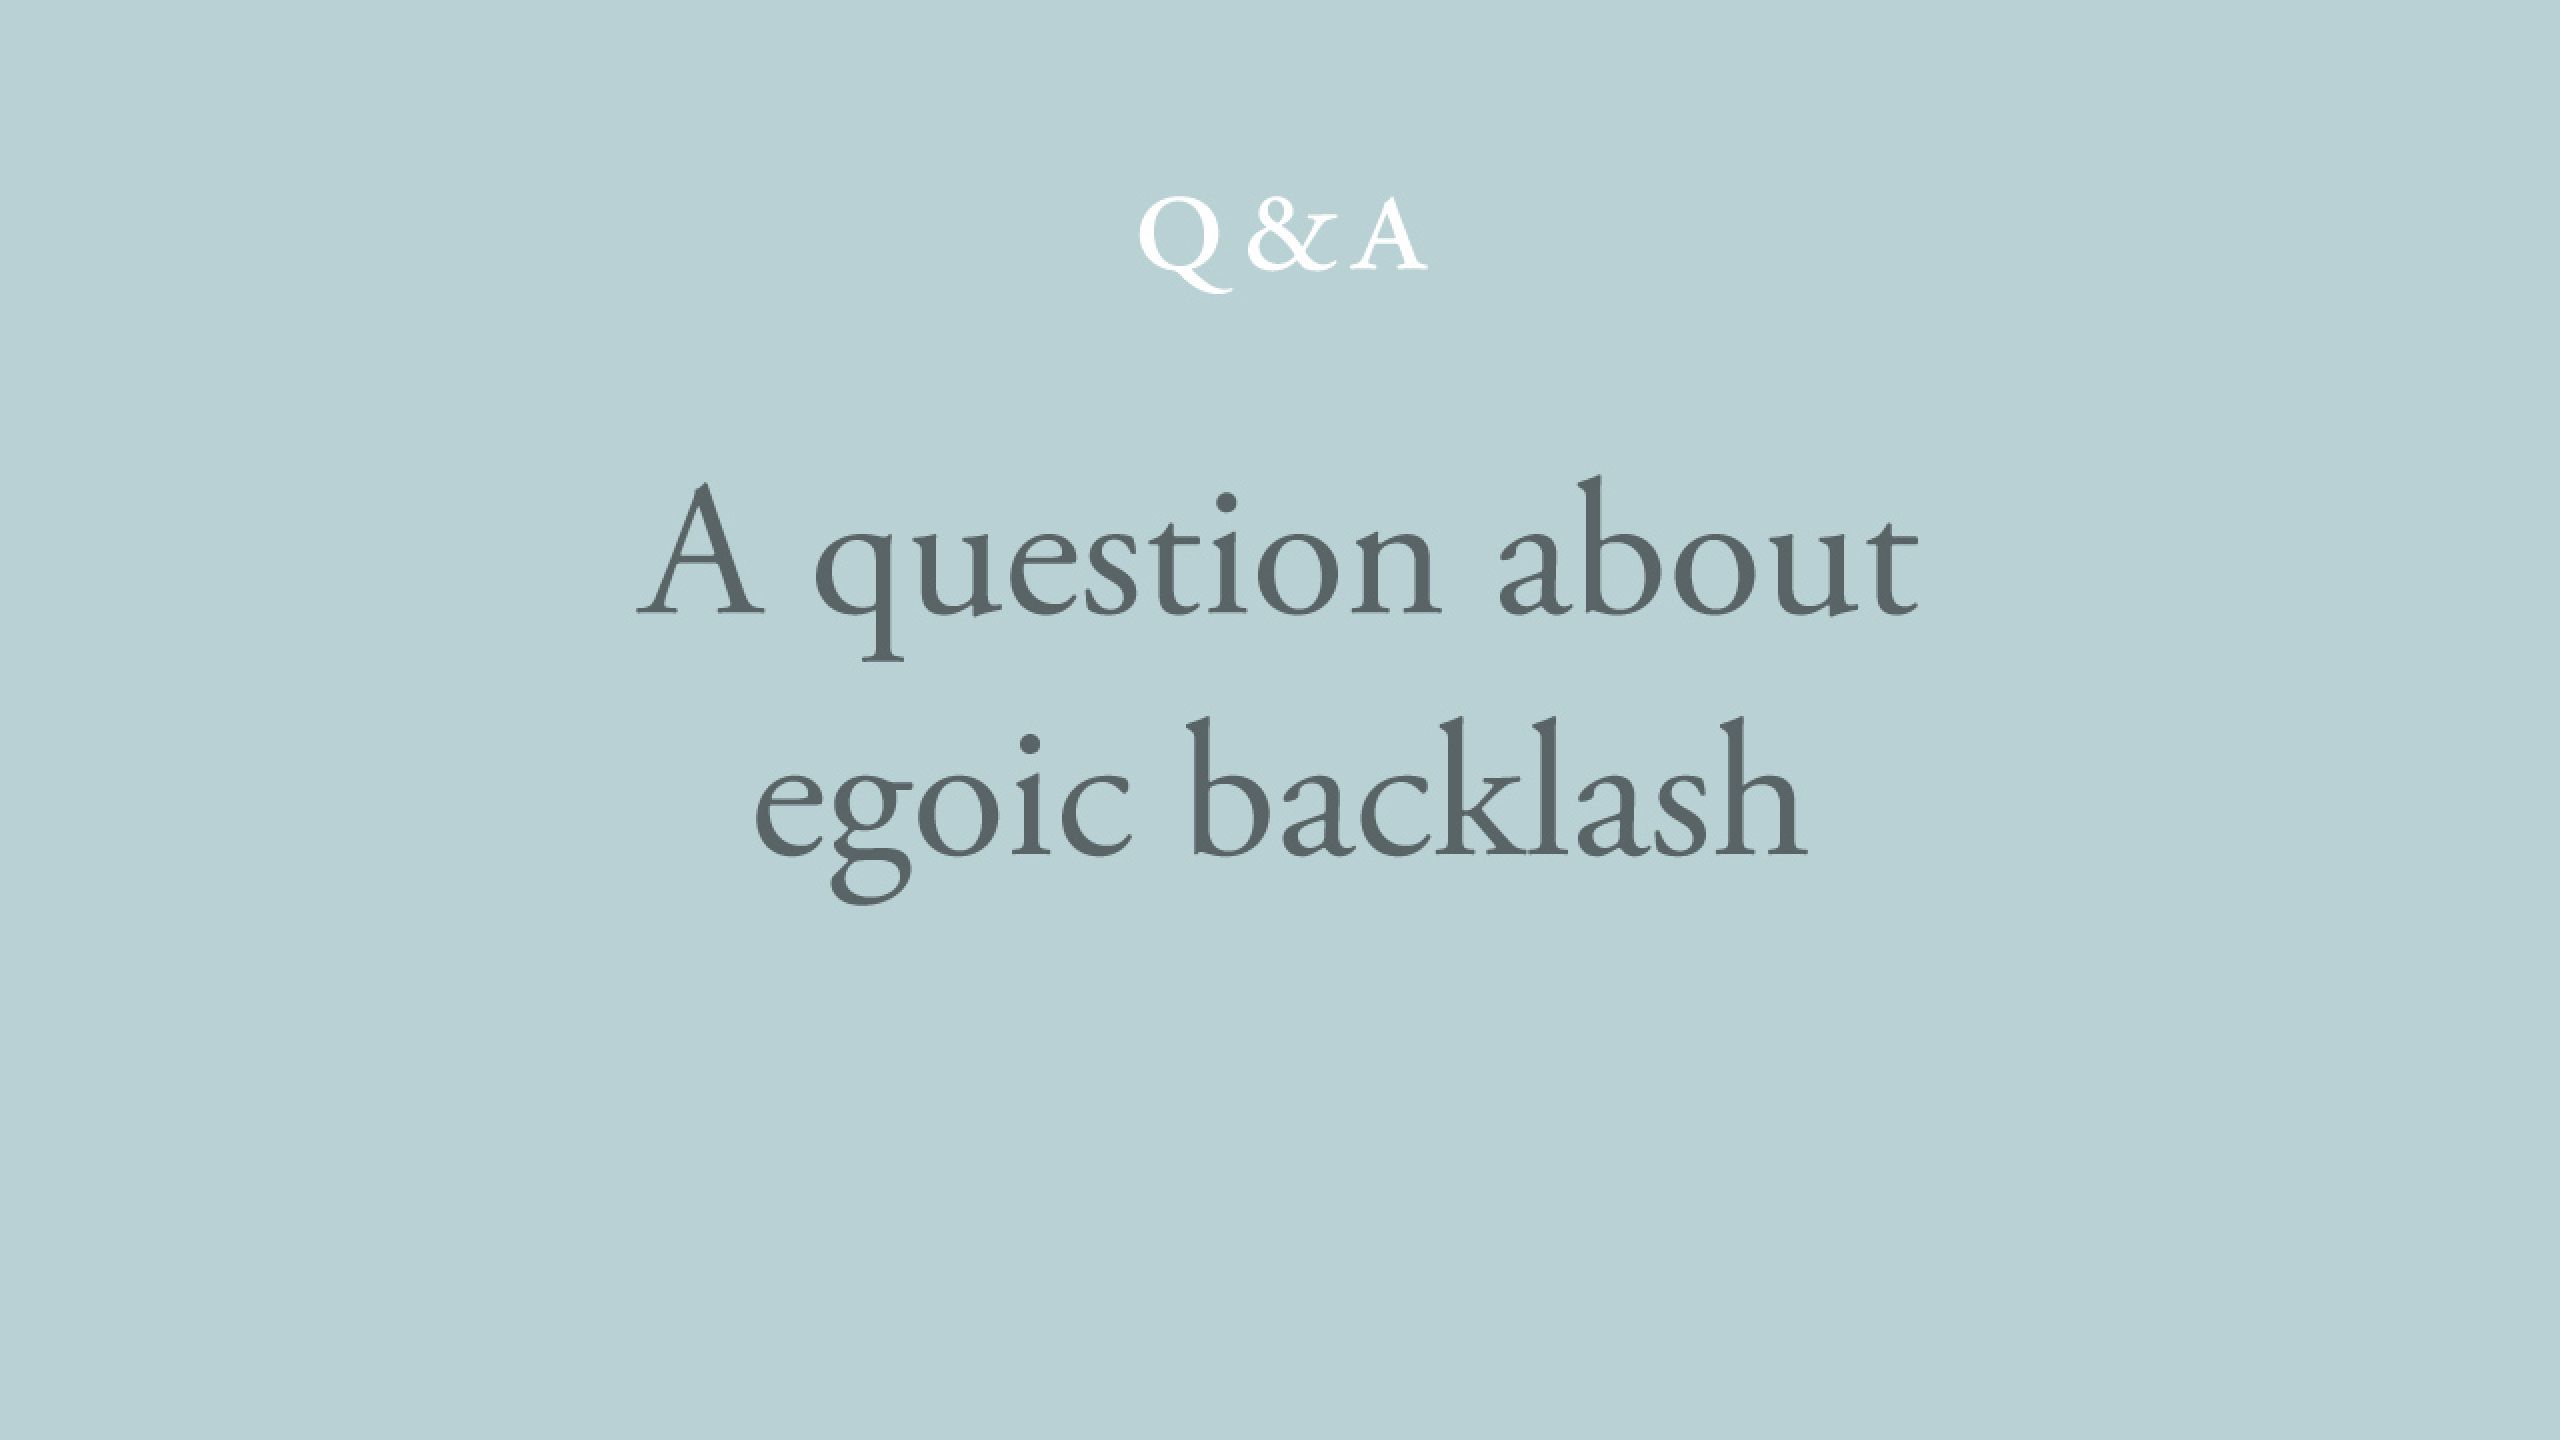 How to cope with egoic backlashes?